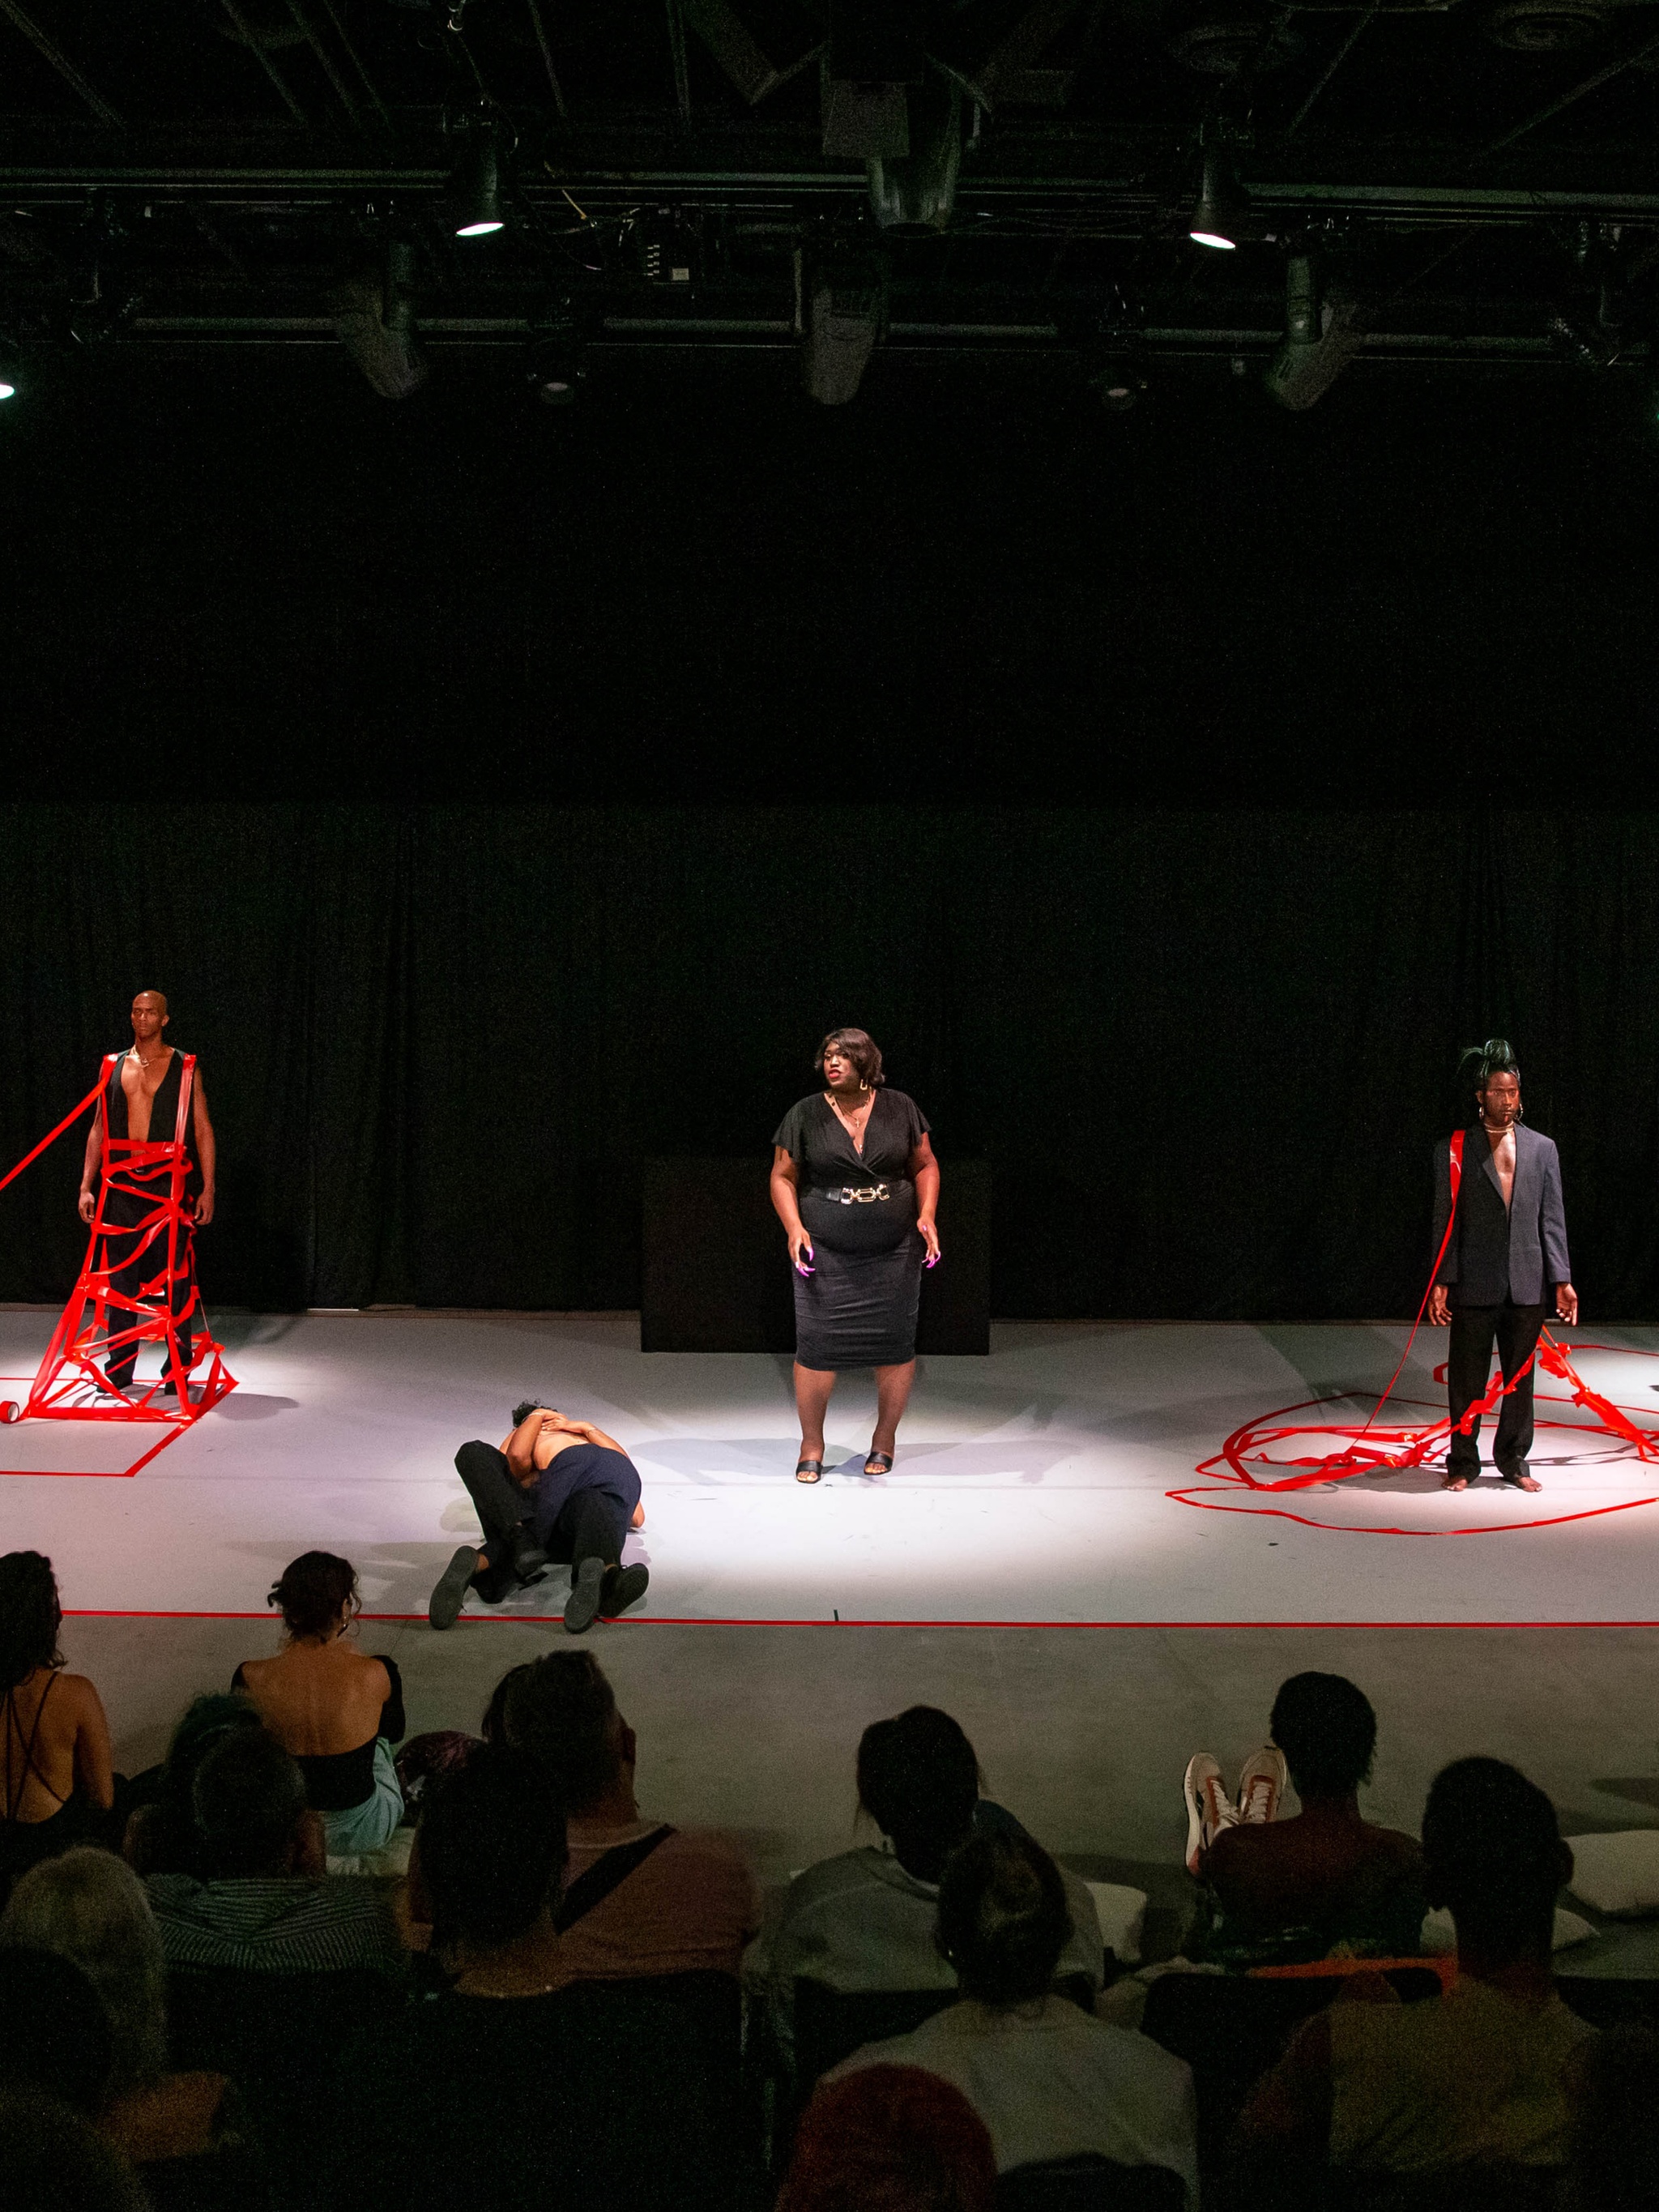 Three Black trans performers stand on a stage wearing black suits and dresses in front of an audience. On the floor of the stage, two performers embrace as they roll together across the floor. Two of the standing performers have red tape reaching up from the ground to hold them in place.